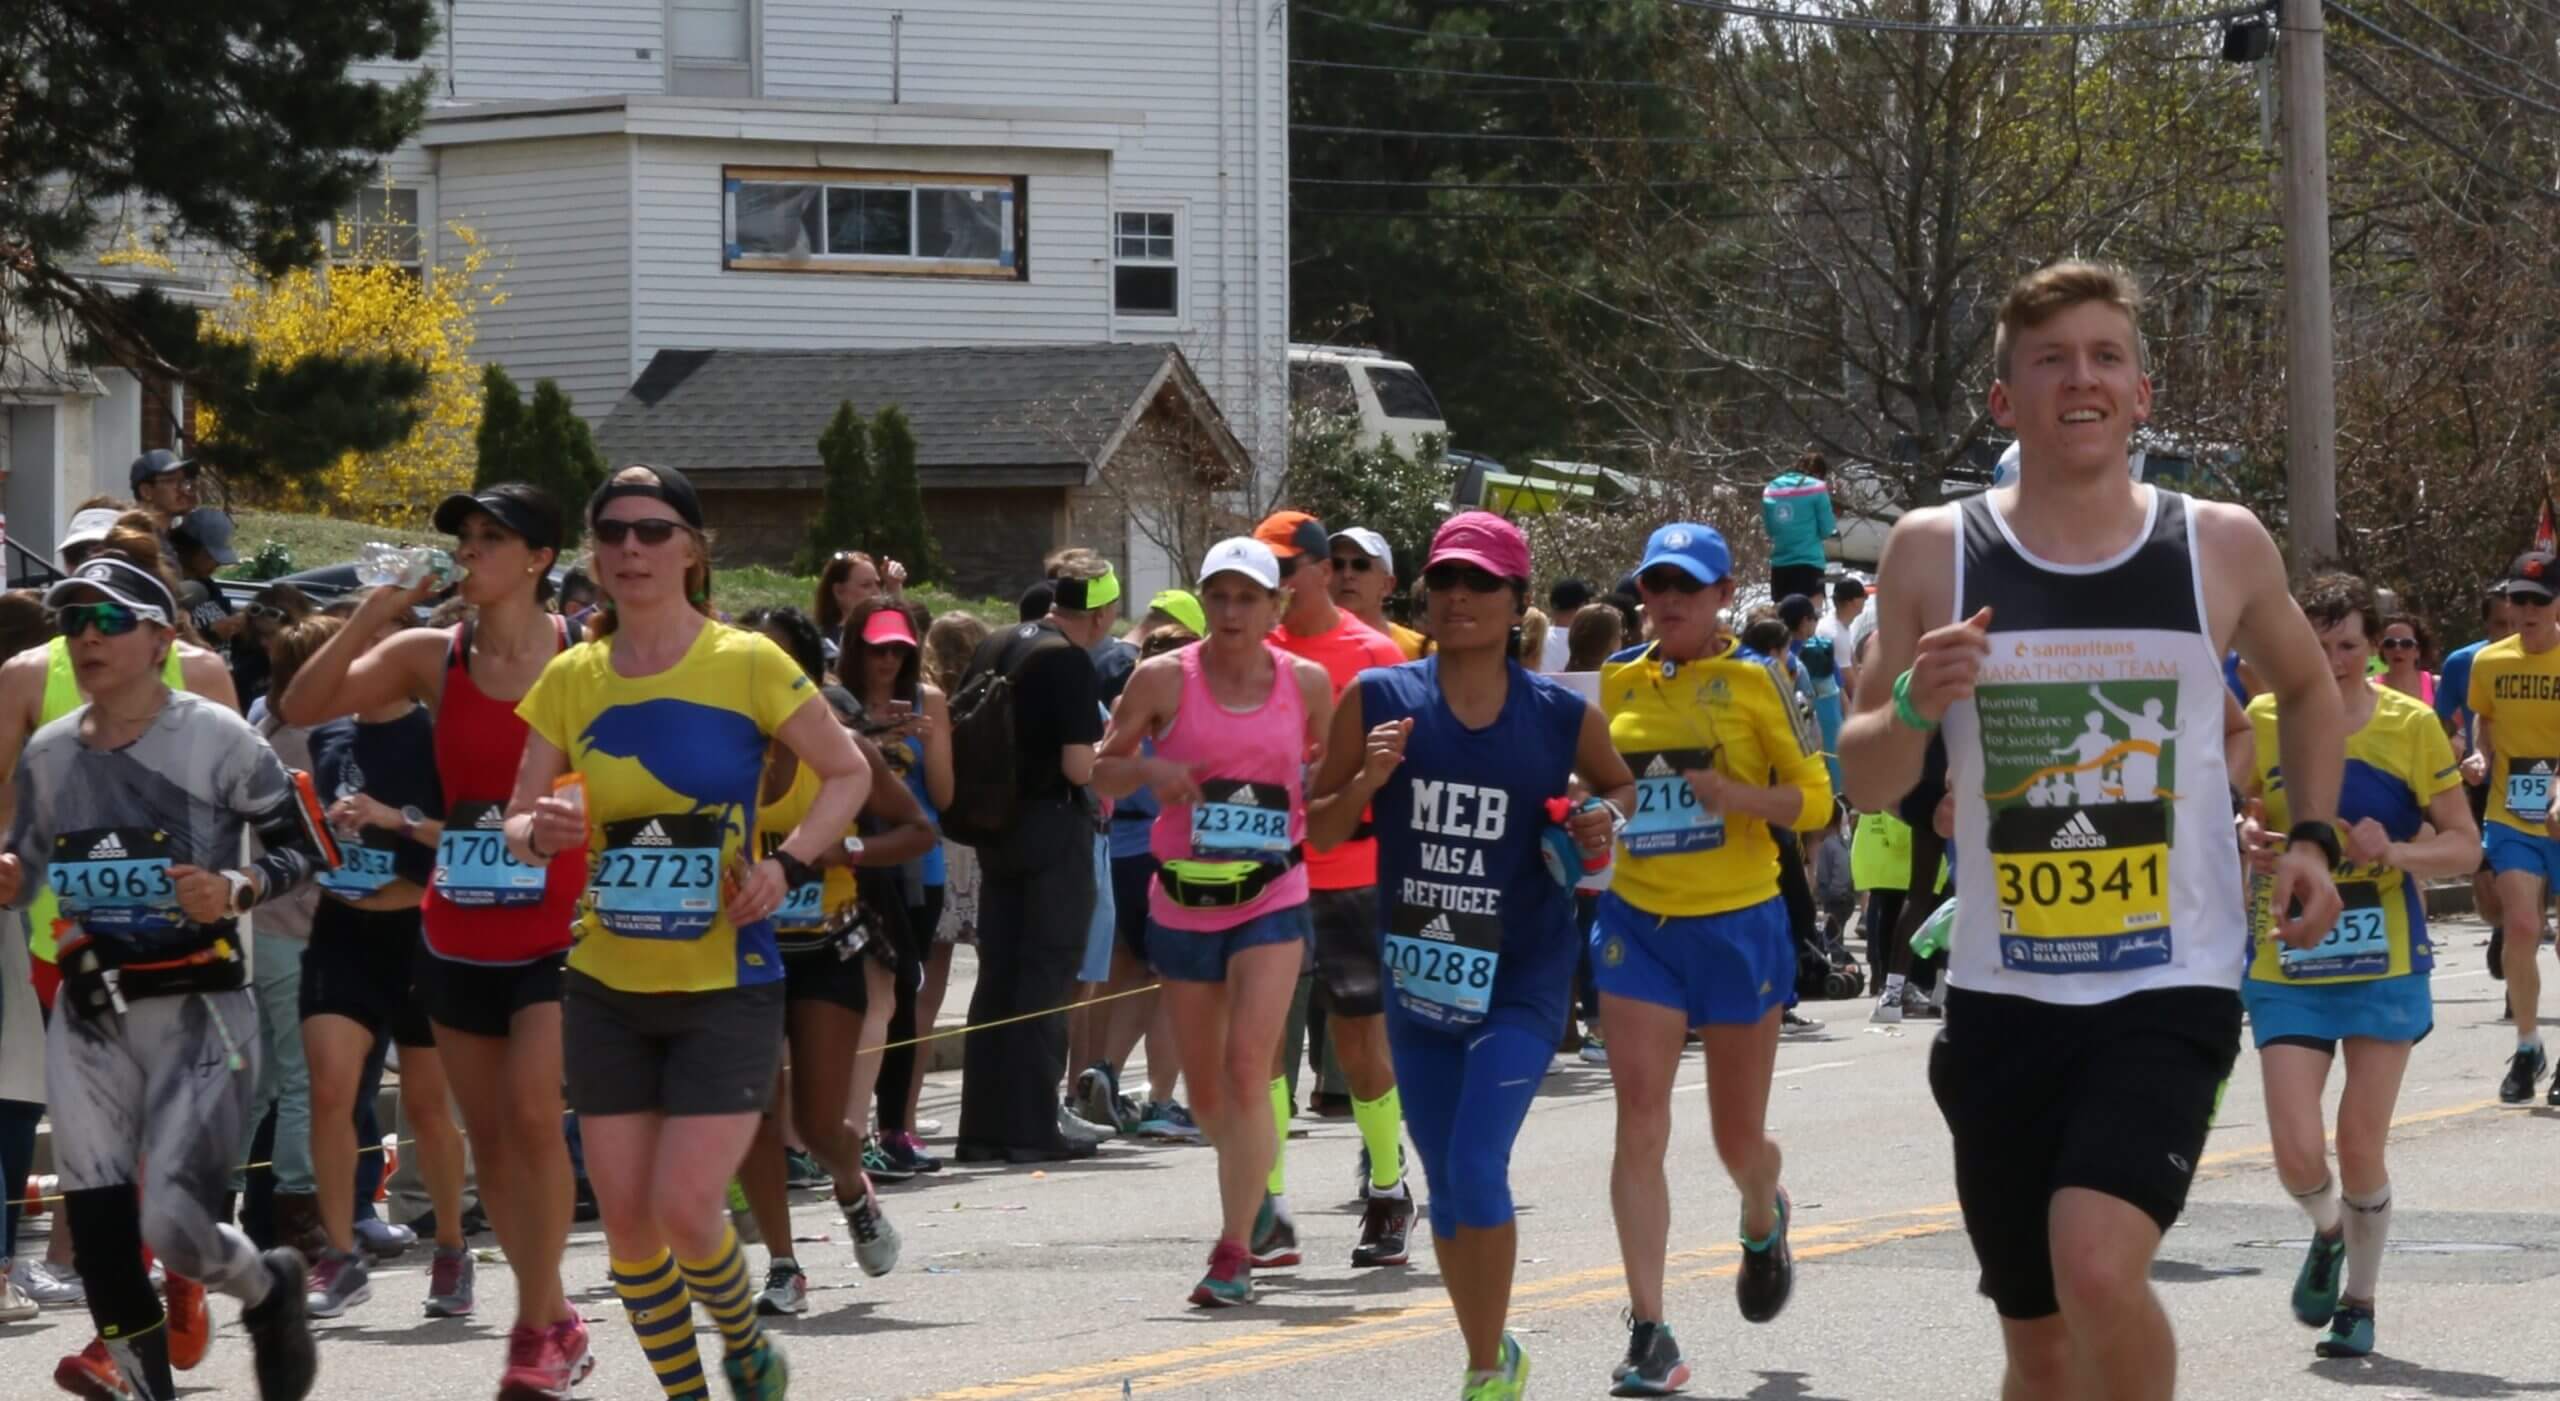 A group of Boston Marathon runners in the middle of the race. Most are wearing shorts, T-shirts and running bibs. Spectators and a white clapboard building are in the background.